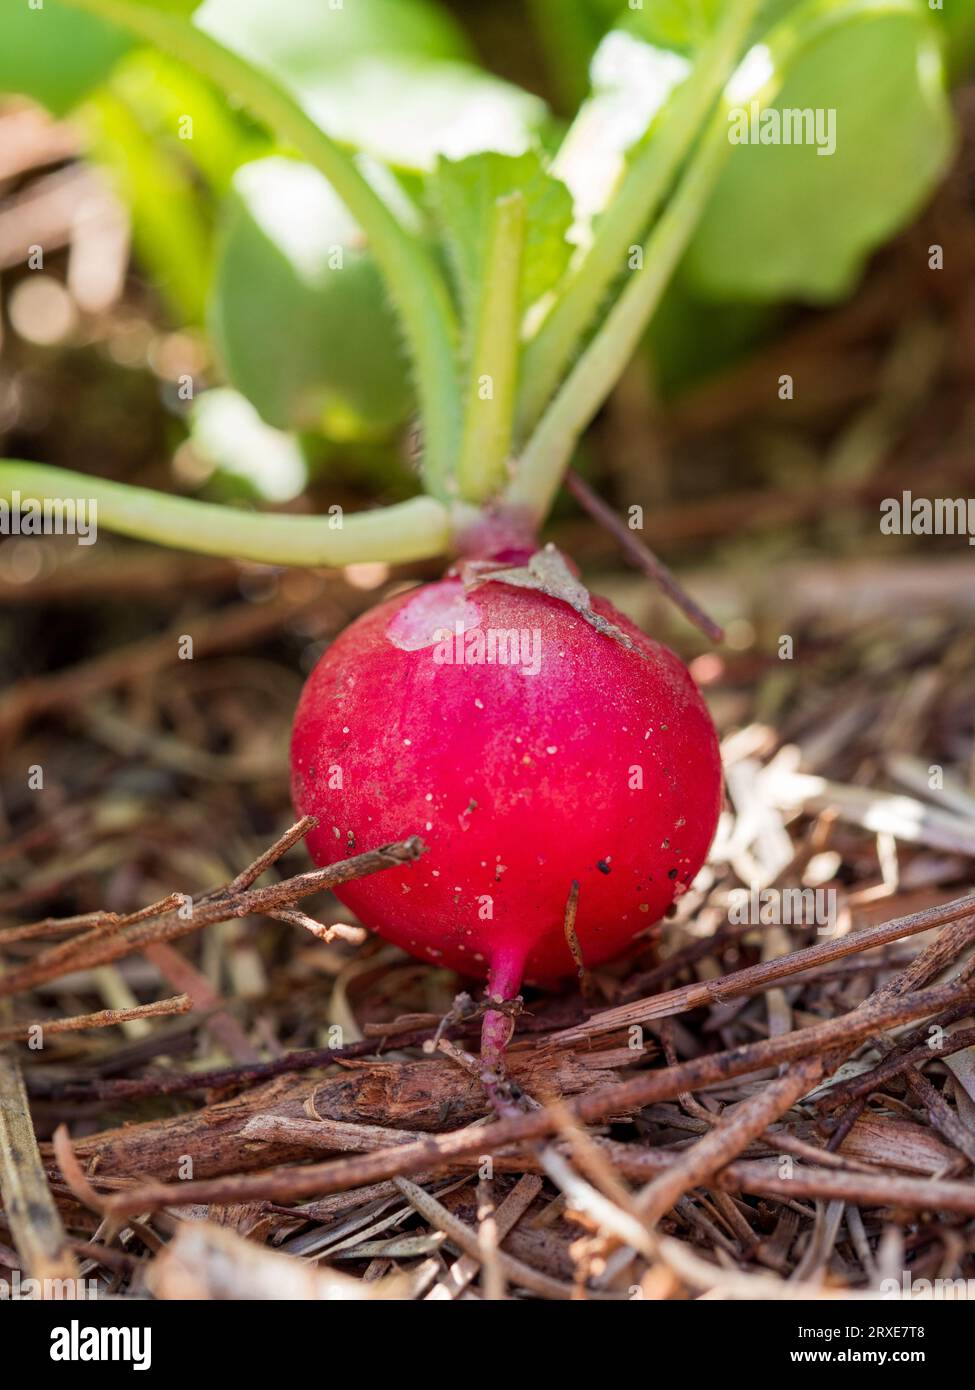 A red Radish with green top just pulled from the dirt in the vegetable garden bed Stock Photo